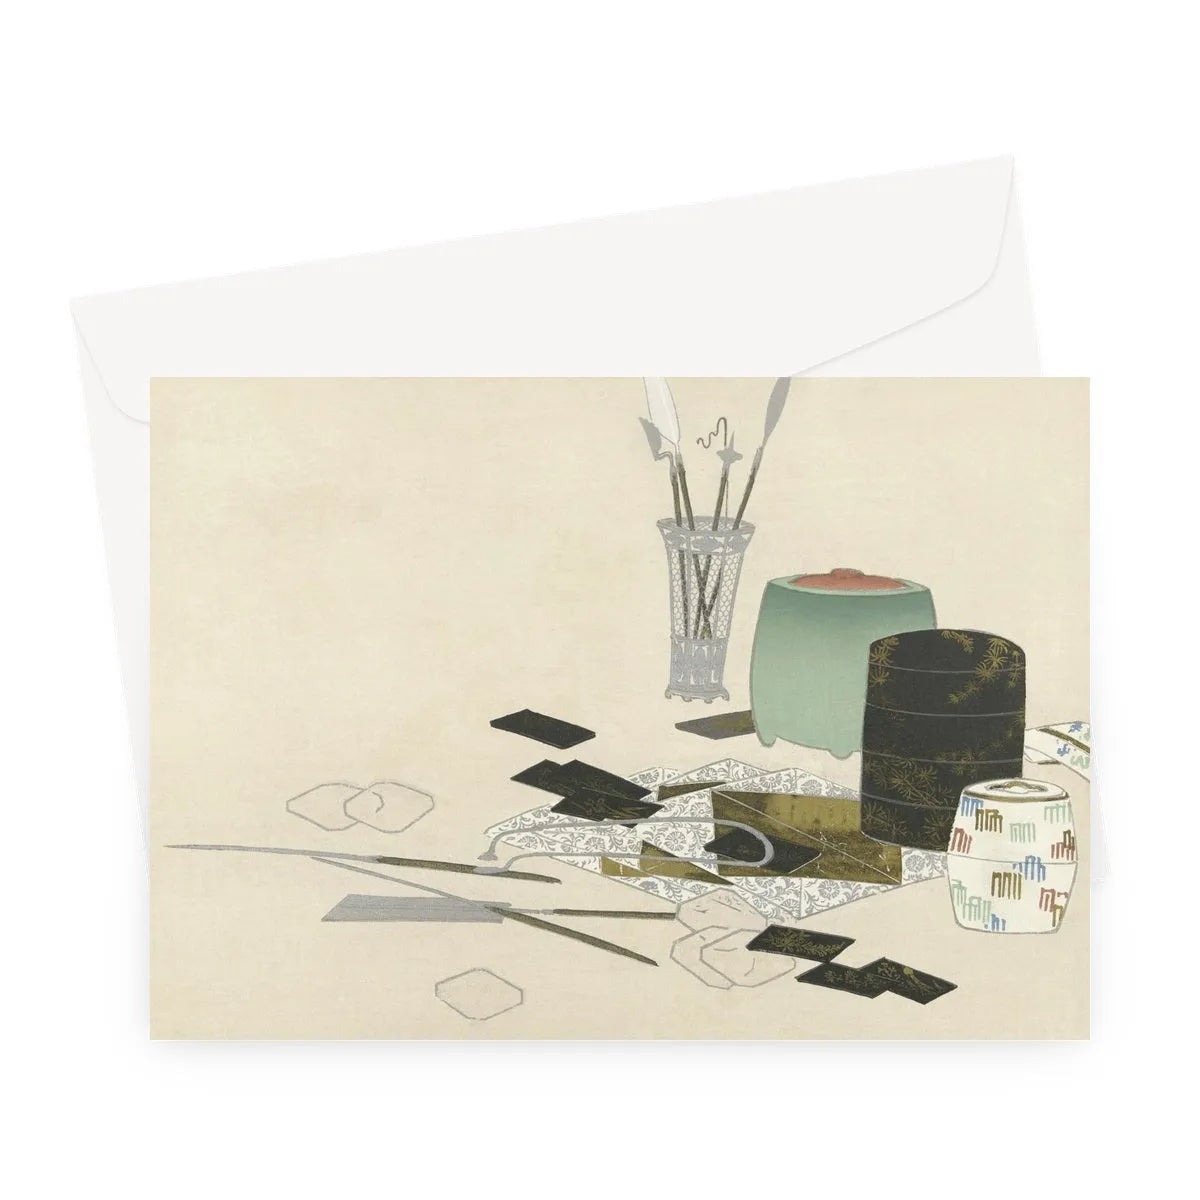 Art Supplies By Kamisaka Sekka Greeting Card - A5 Landscape / 1 Card - Greeting & Note Cards - Aesthetic Art